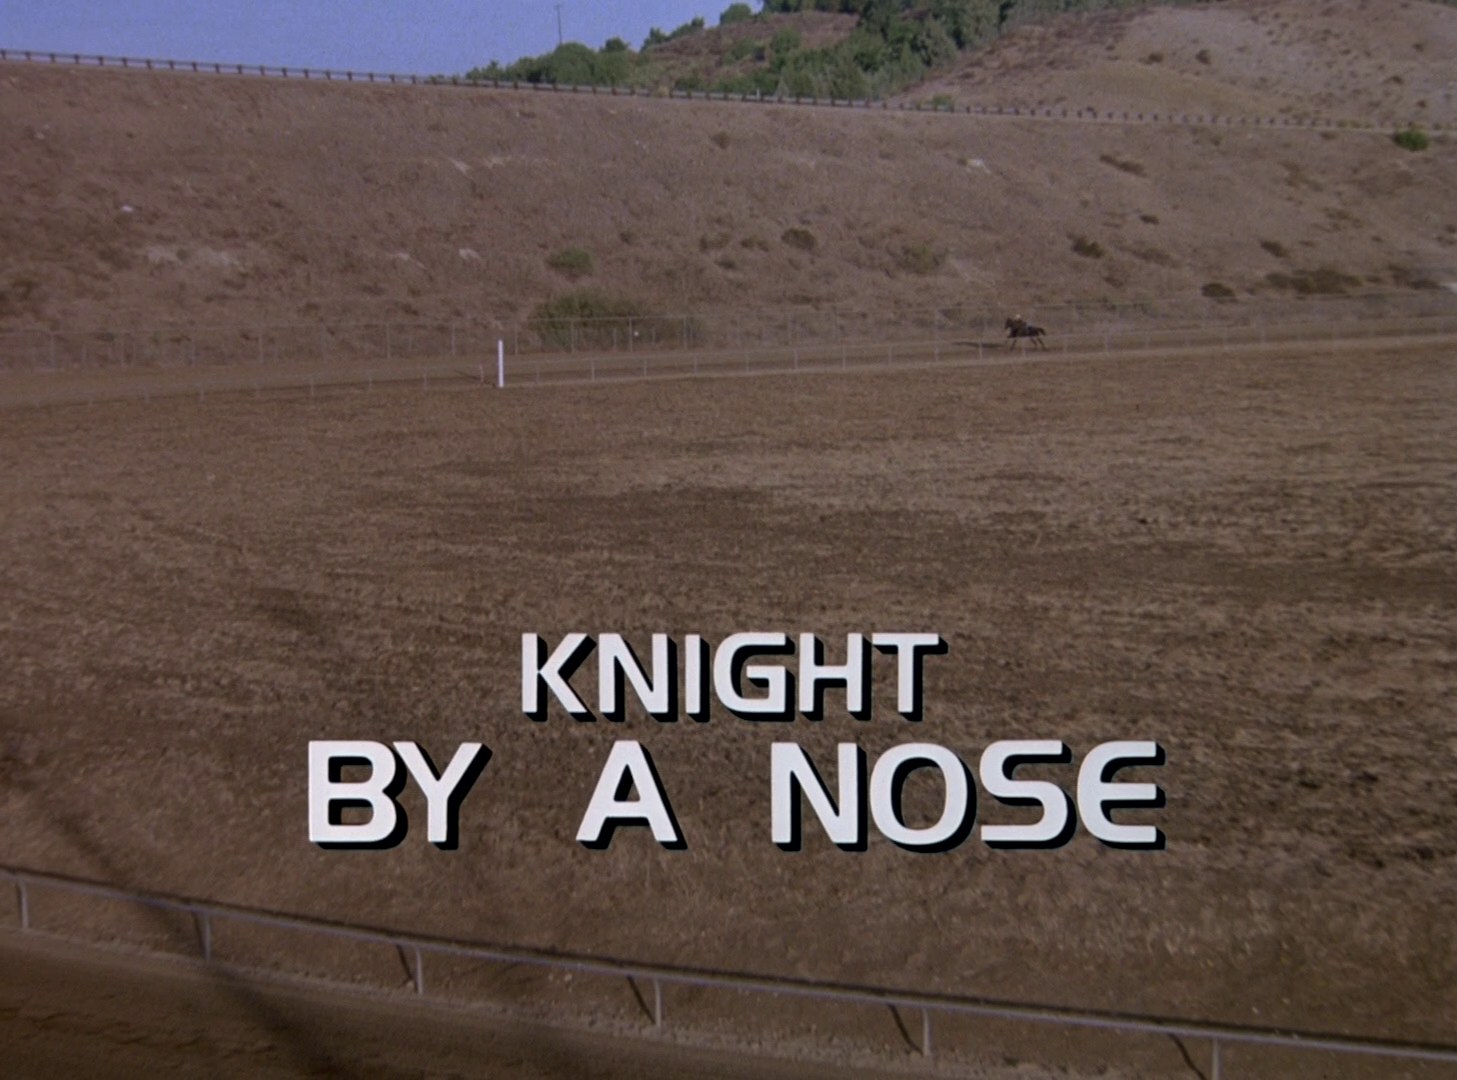 Knight Rider Season 3 - Episode 54 - Knight By A Nose - Photo 1